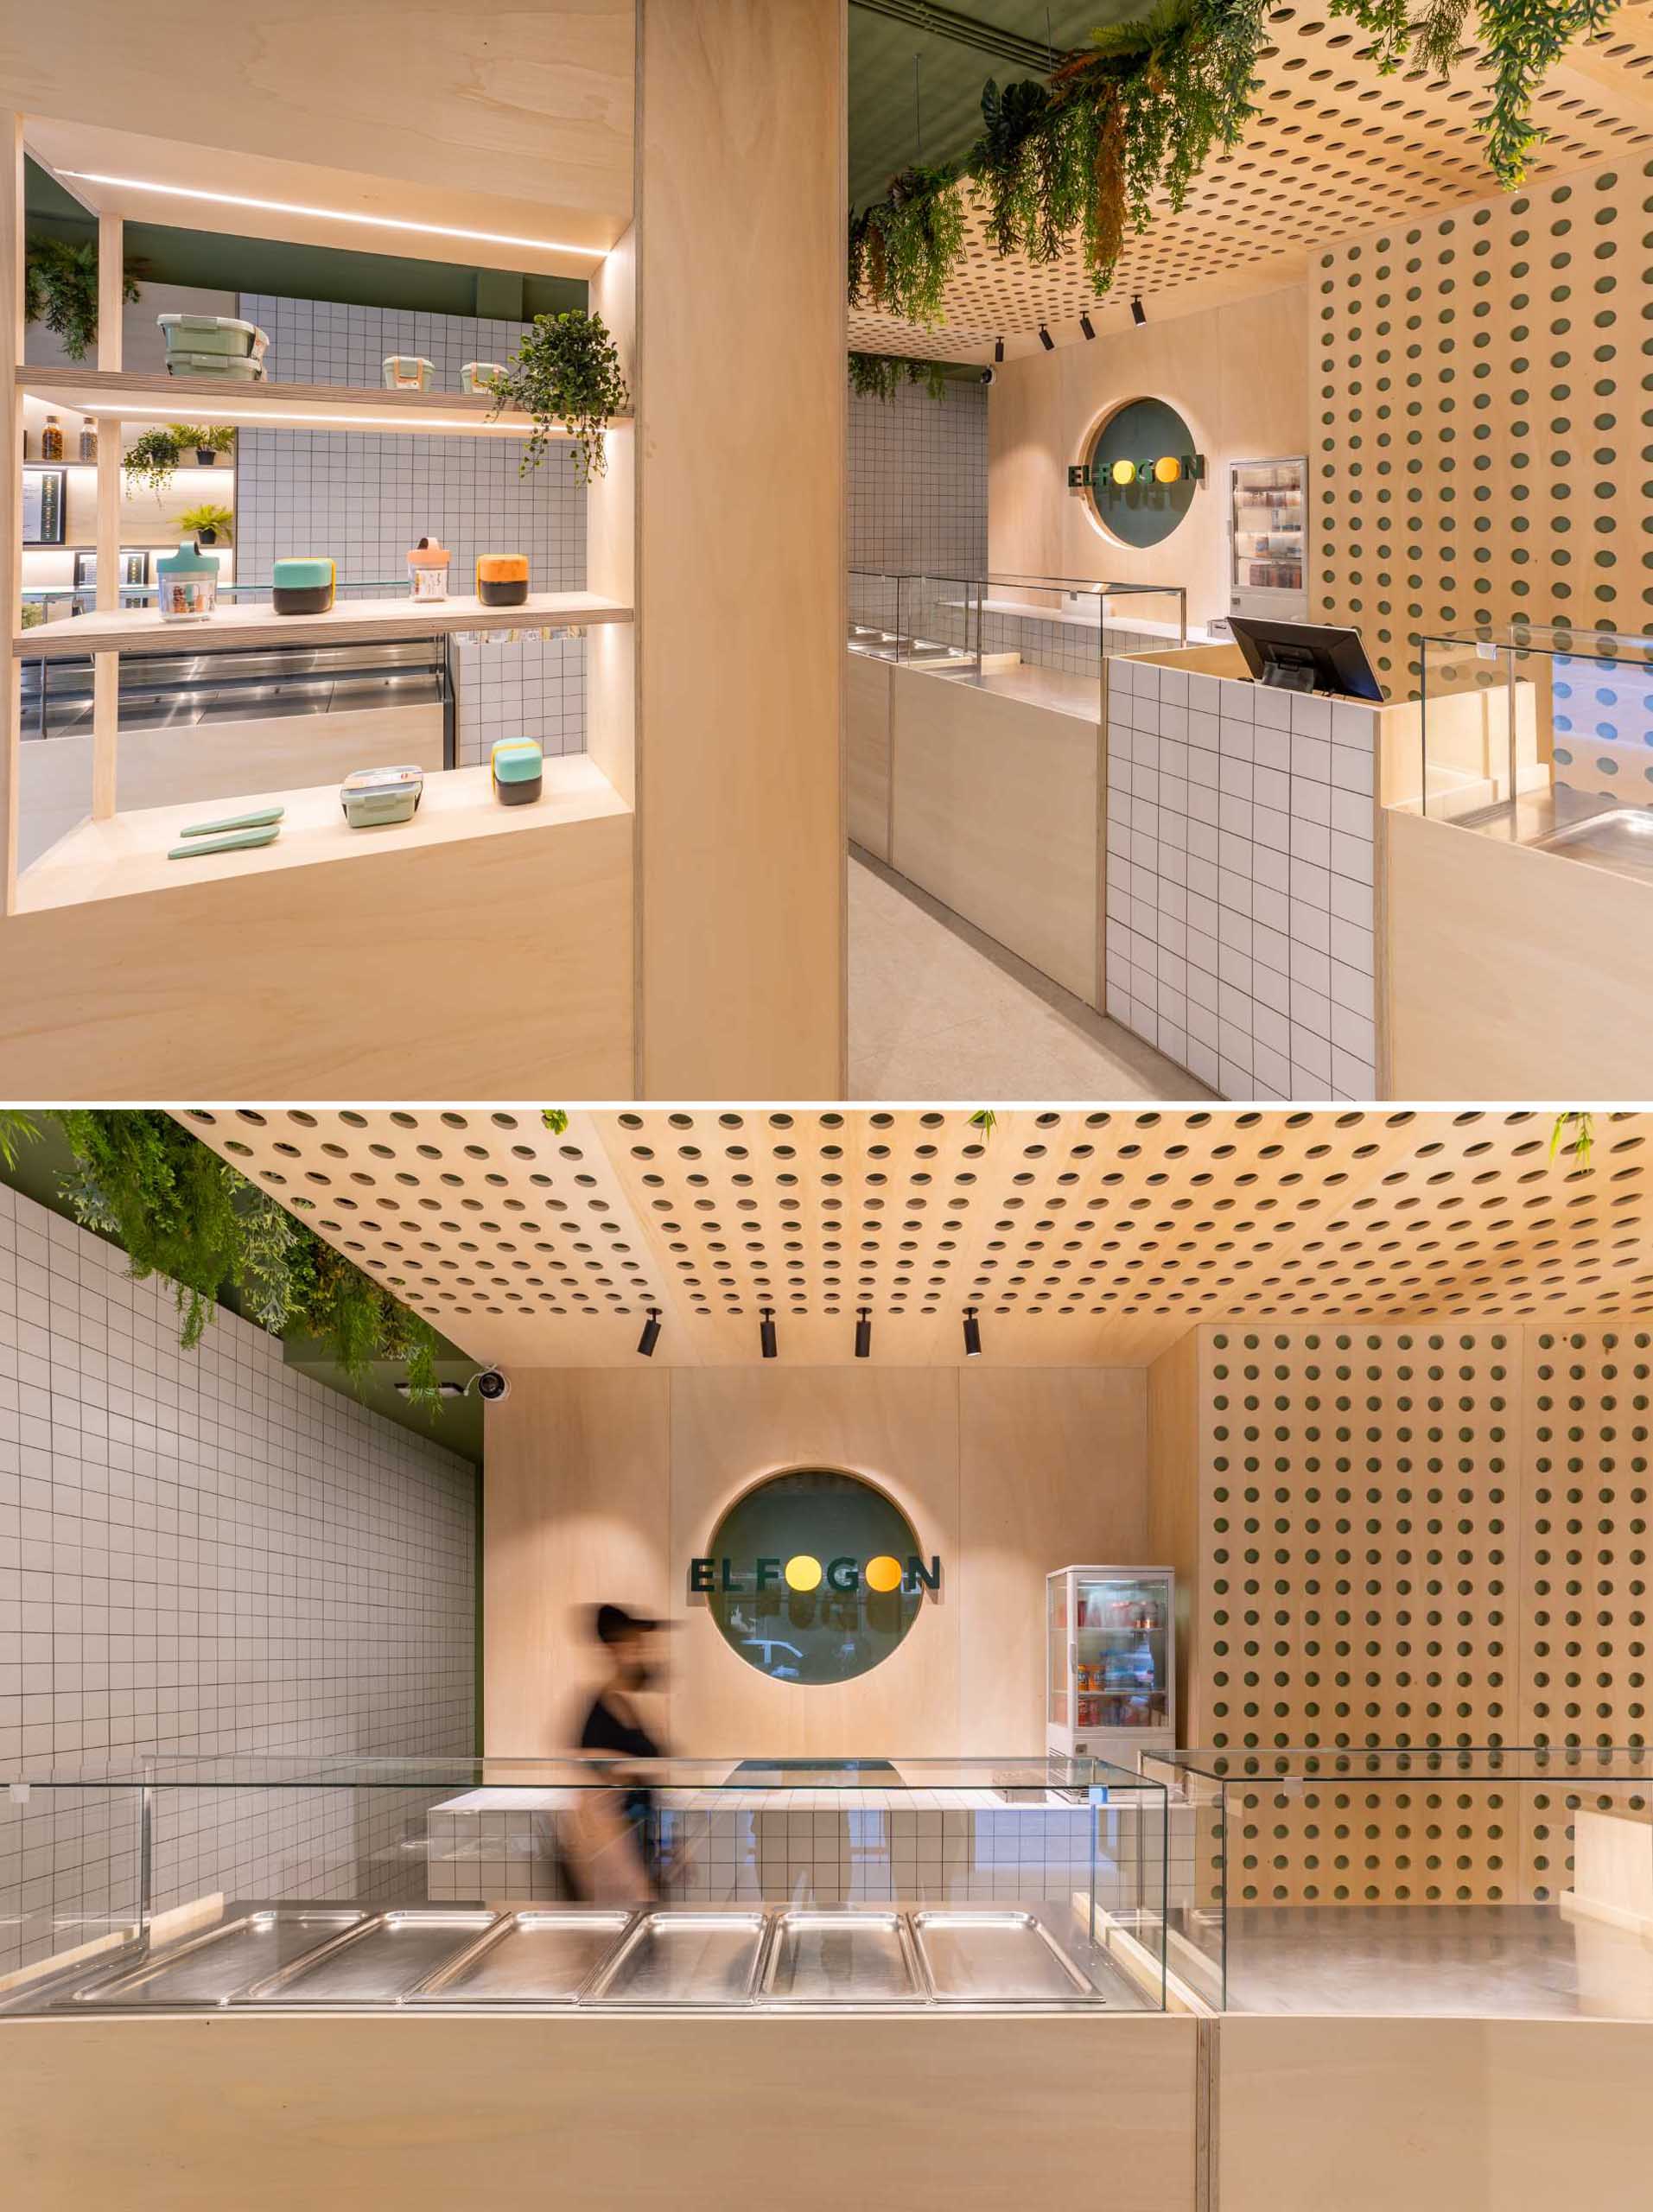 This food service area includes minimalist glass cases, allowing the food to be showcased.